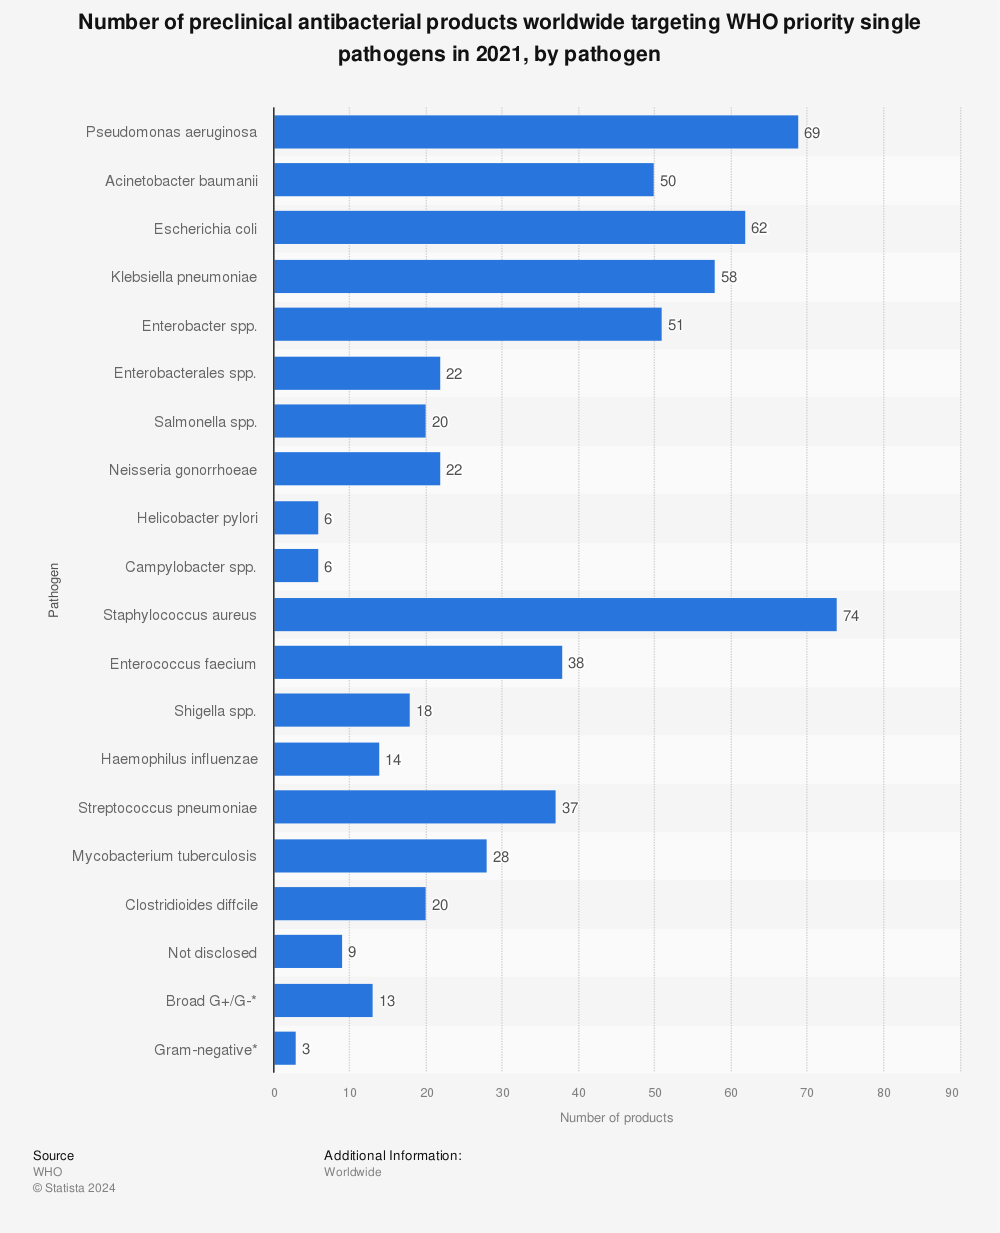 Statistic: Number of preclinical antibacterial products worldwide targeting WHO priority single pathogens in 2021, by pathogen | Statista